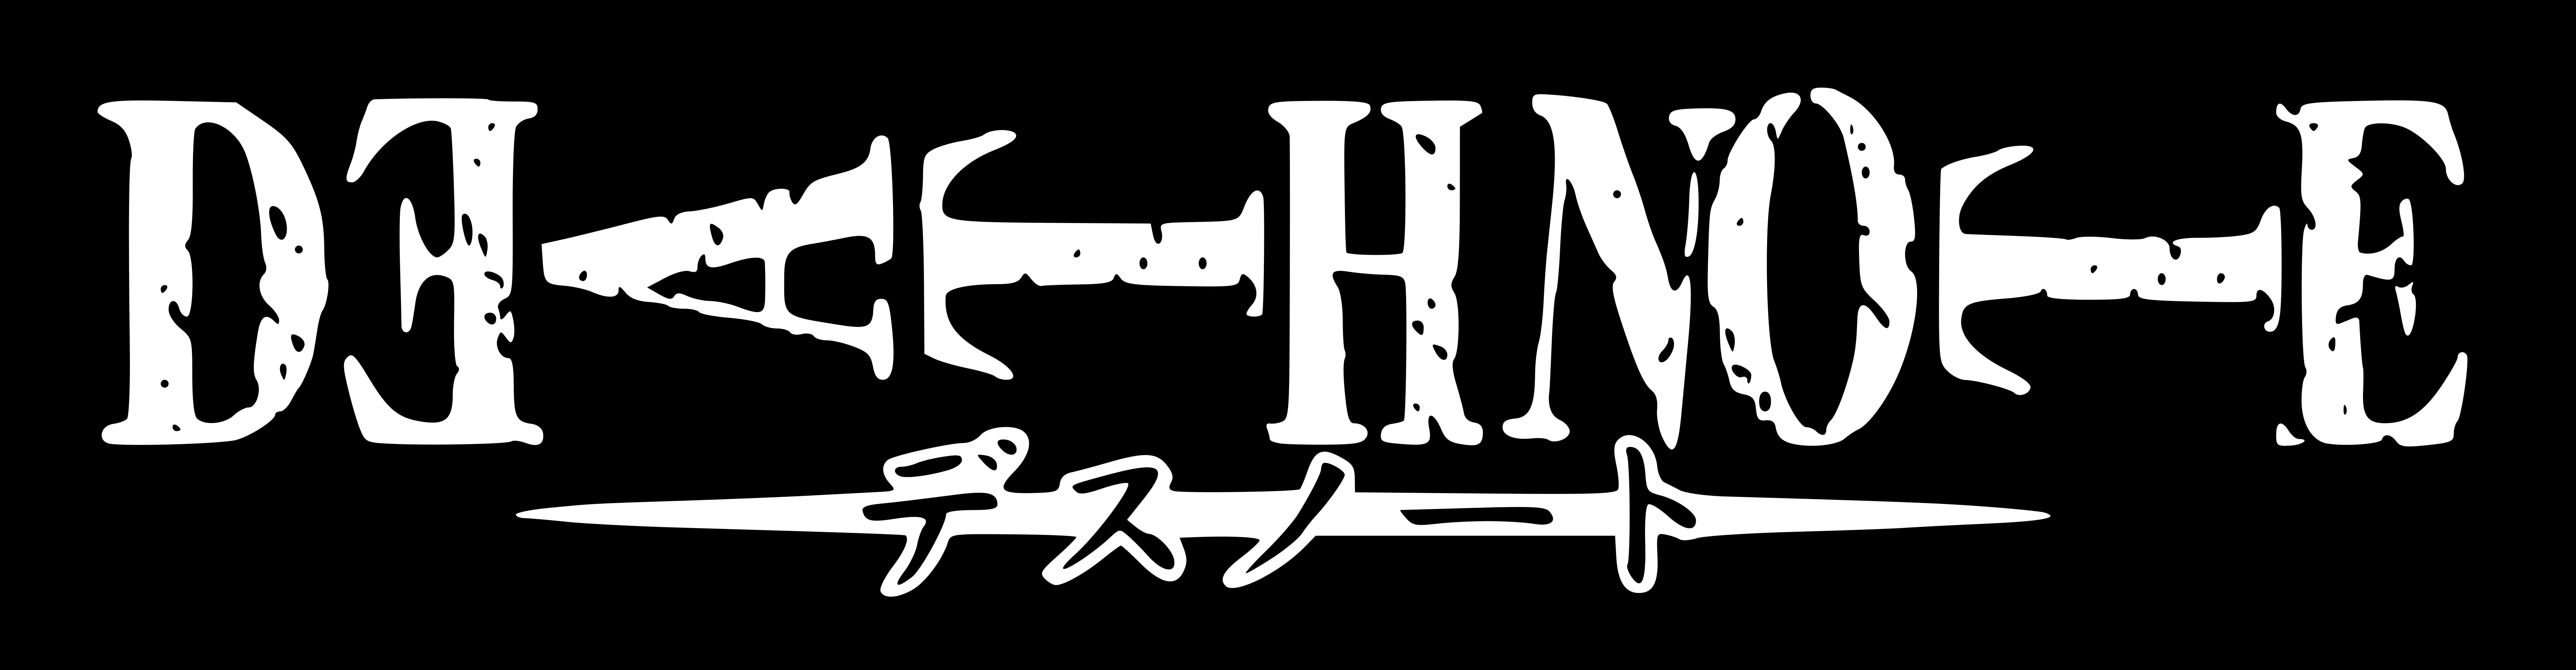 File:Death Note logo (black background).png - Wikimedia Commons